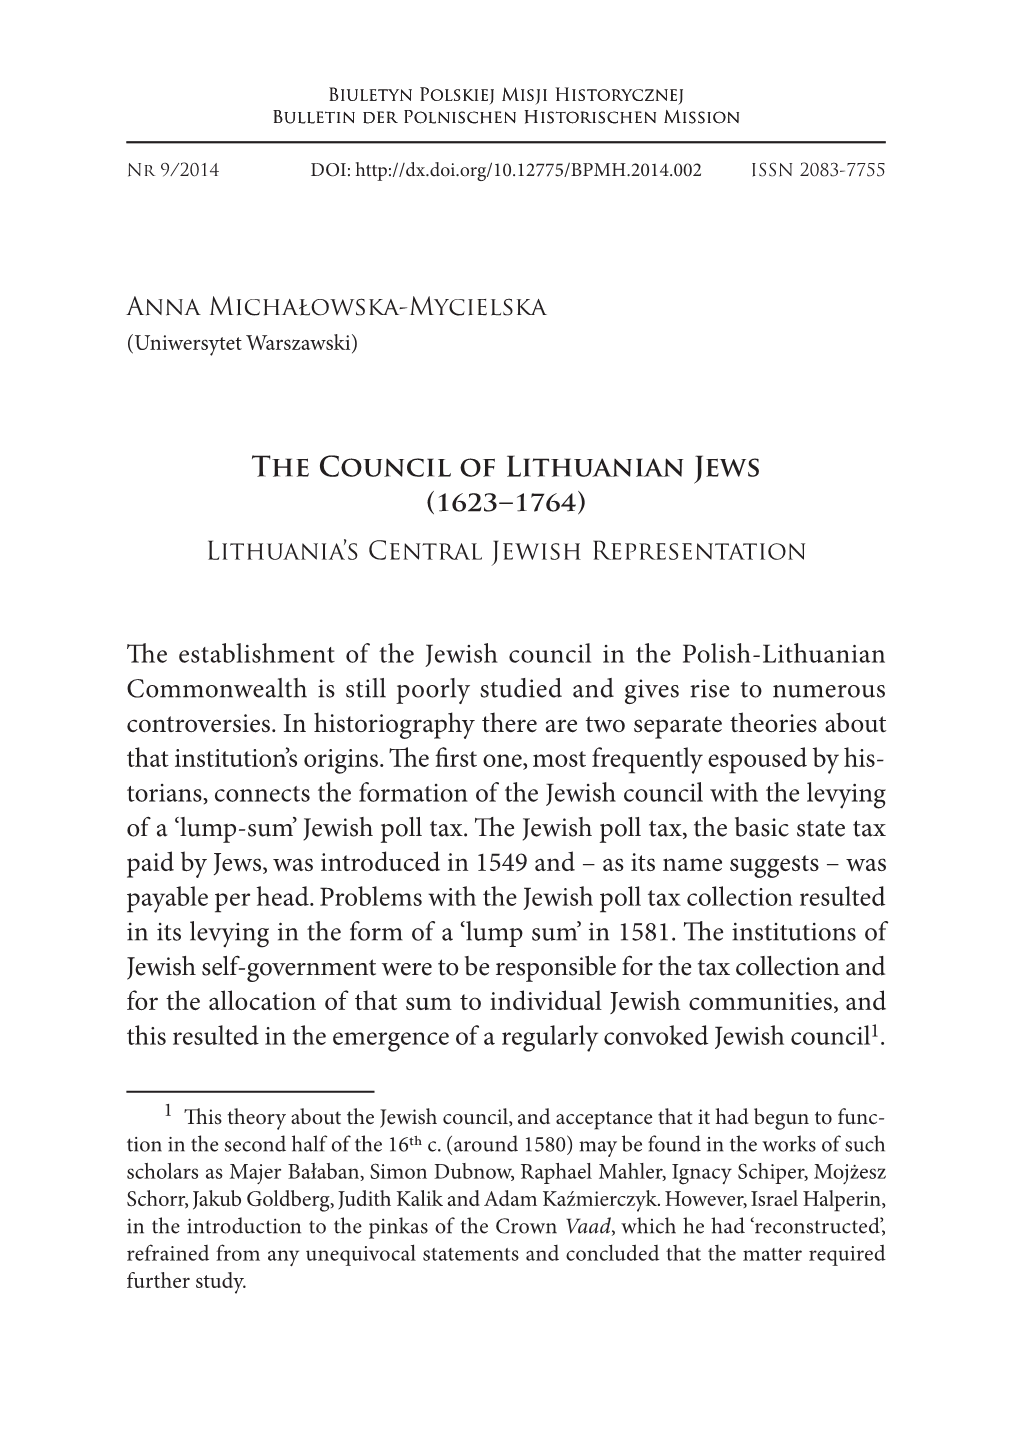 The Seym of Lithuanian Jews (1623–1764) the Central Jewish